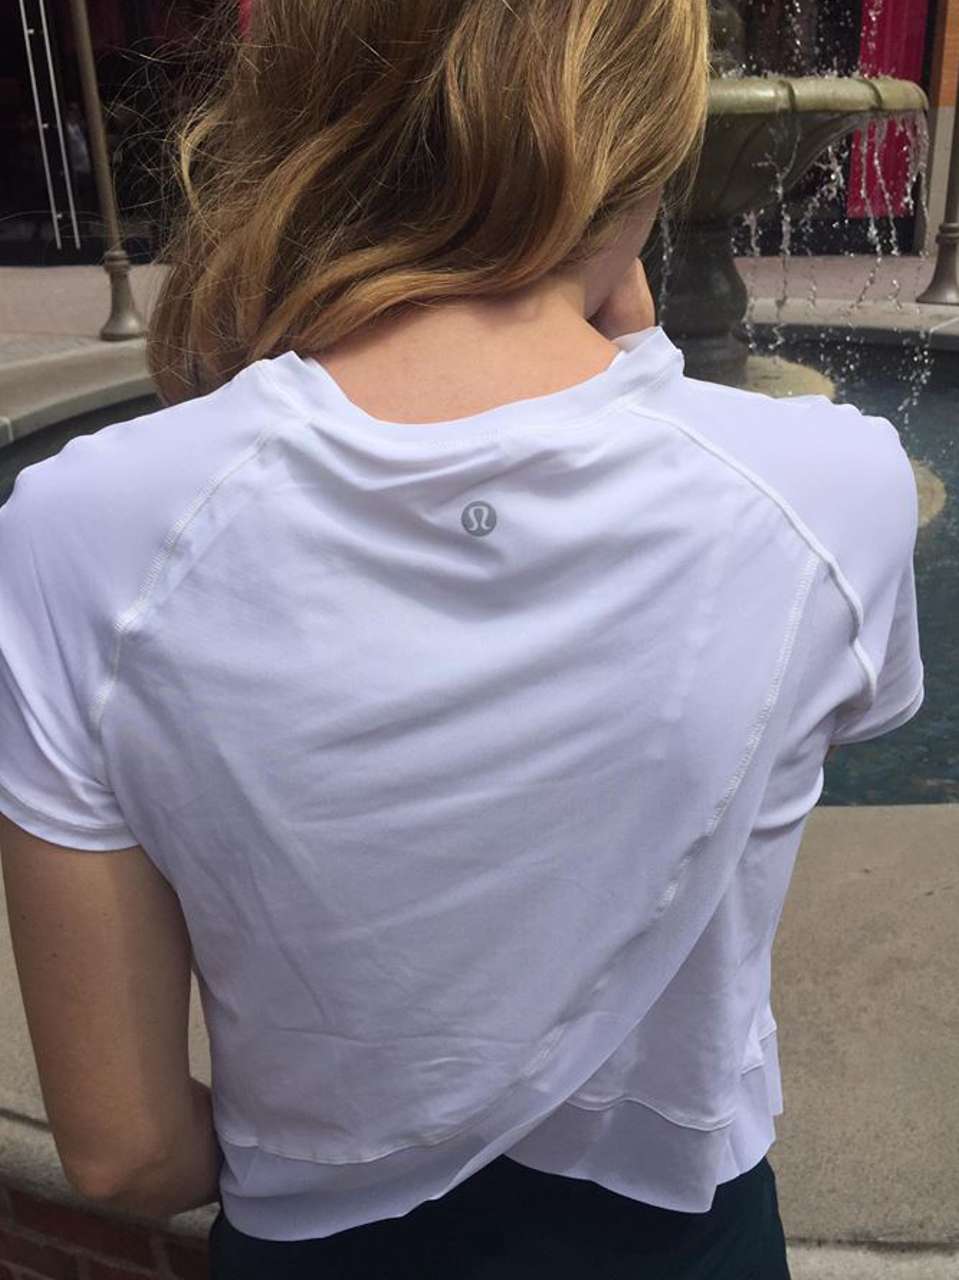 Lululemon Quick Pace Short Sleeve - White (First Release)